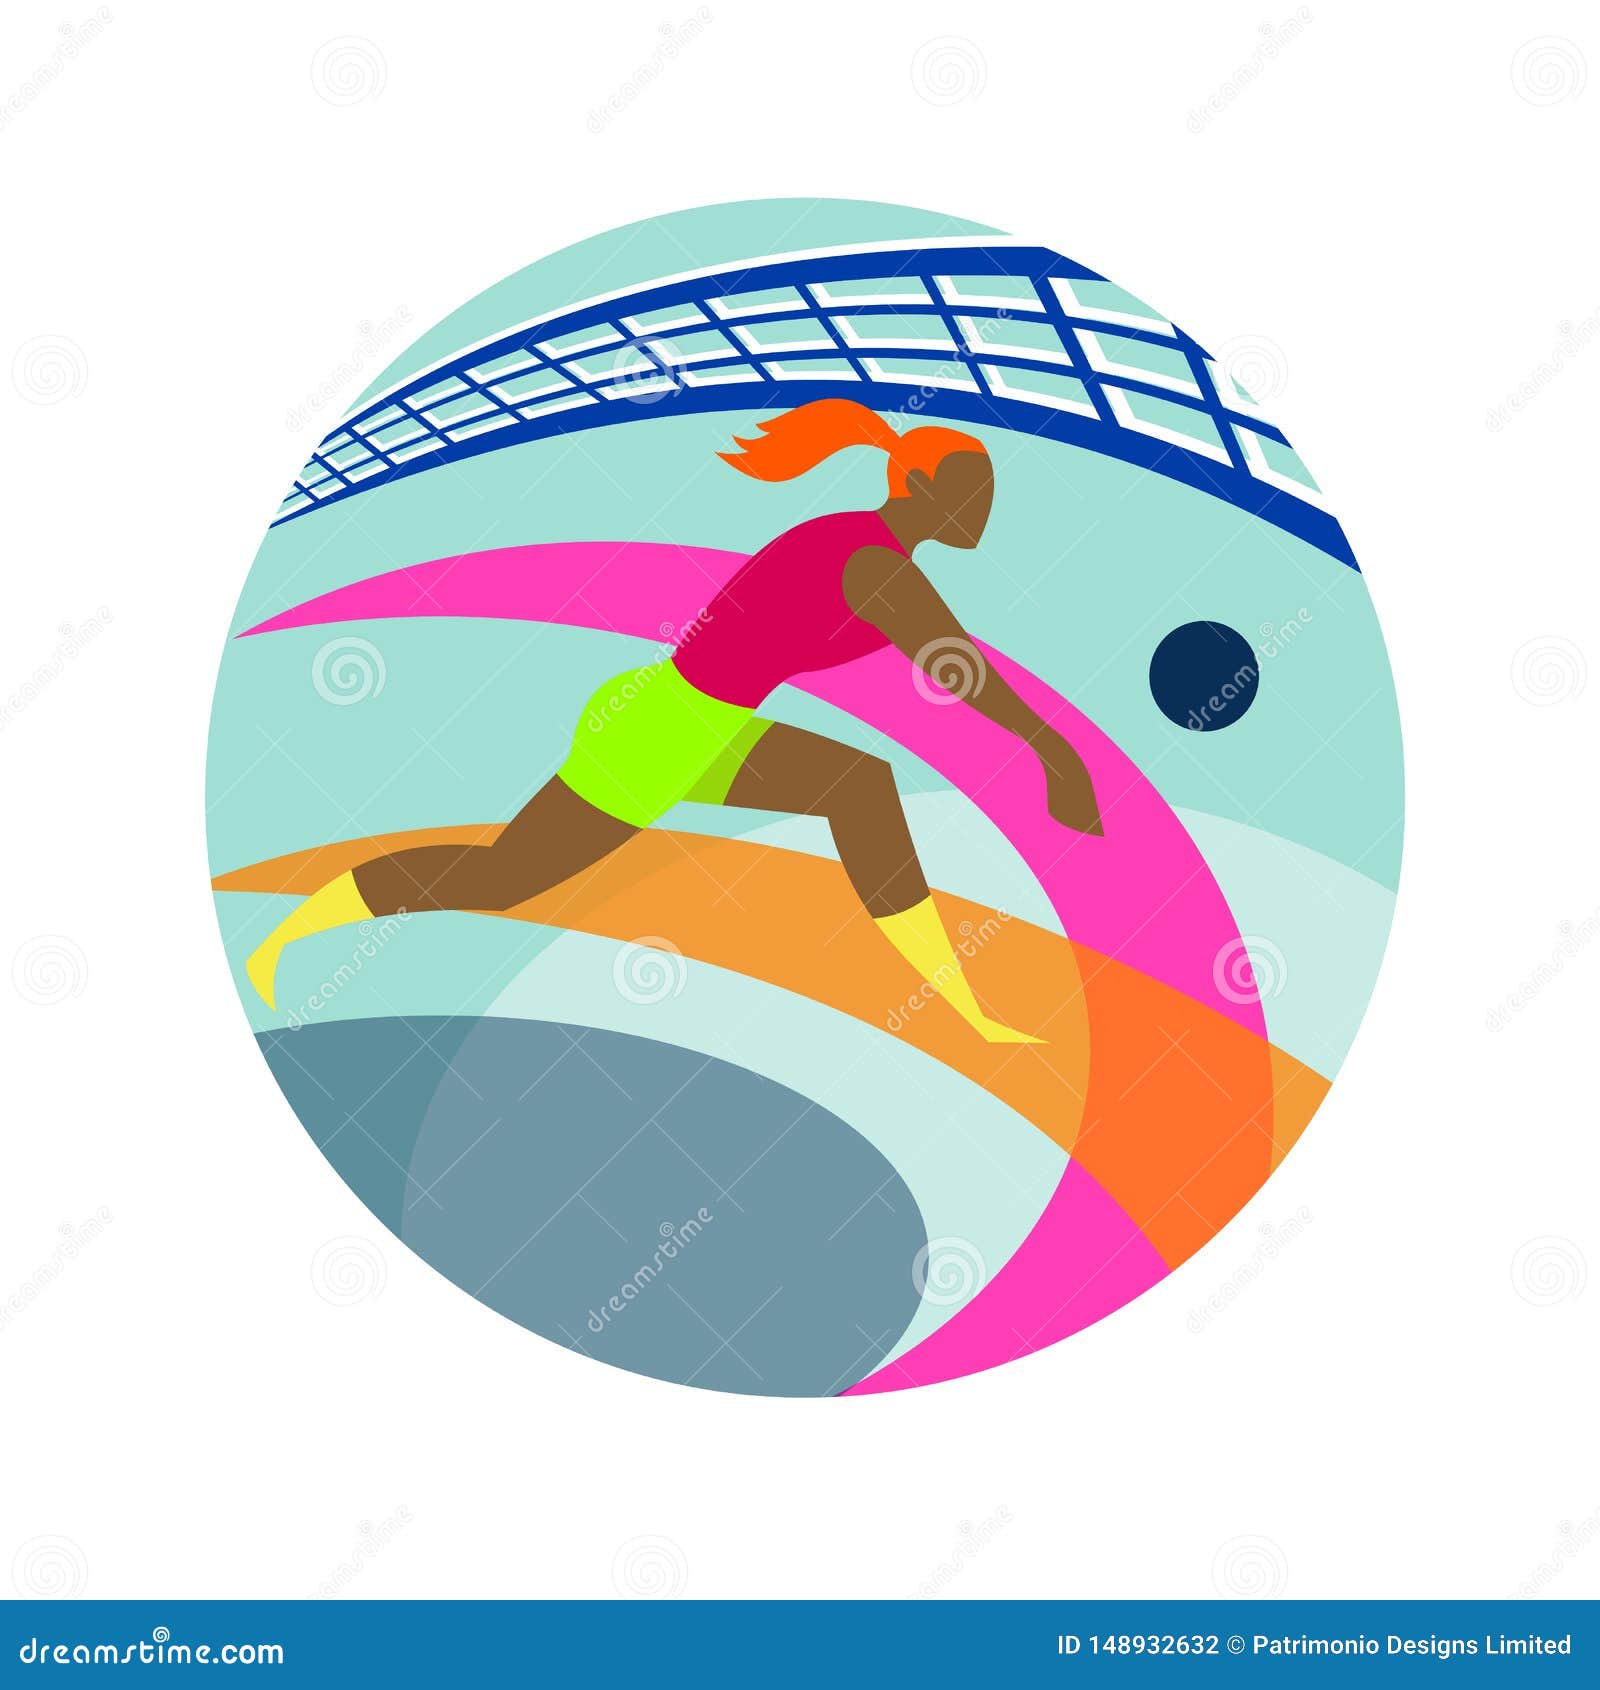 volleyball player passing ball icon